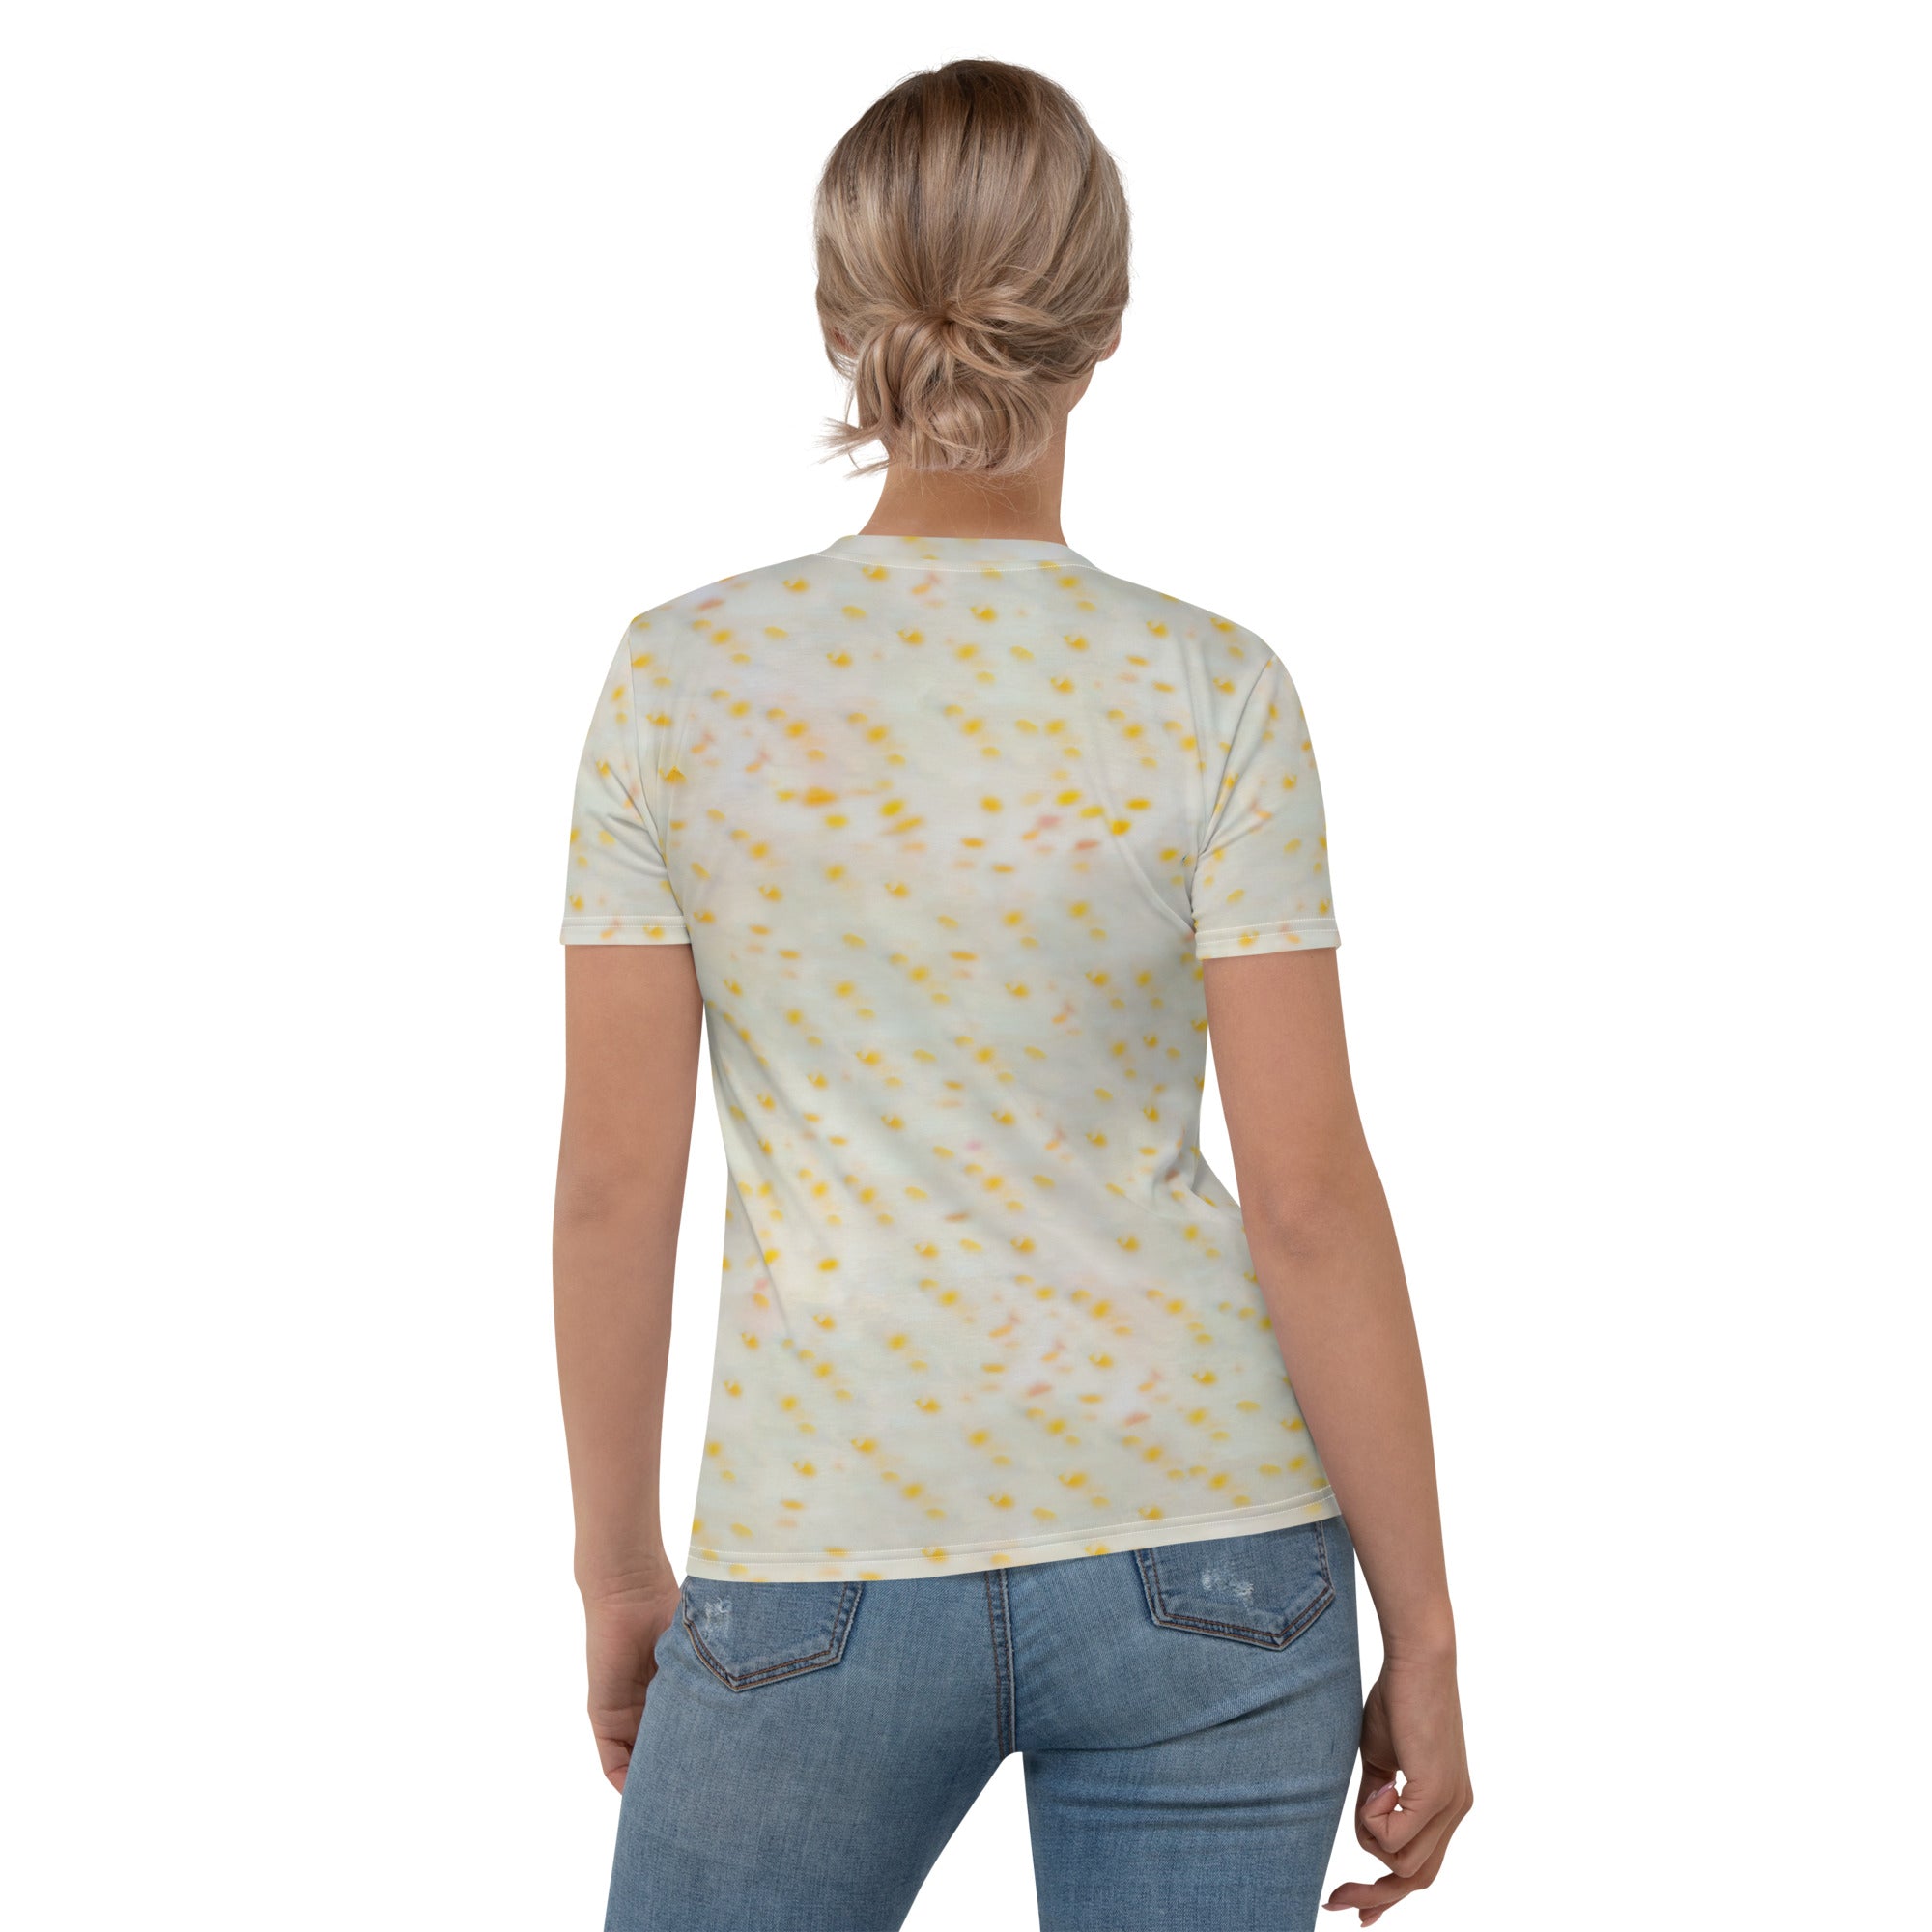 Stylish women's crew neck featuring Tropical Parrot Paradise pattern.